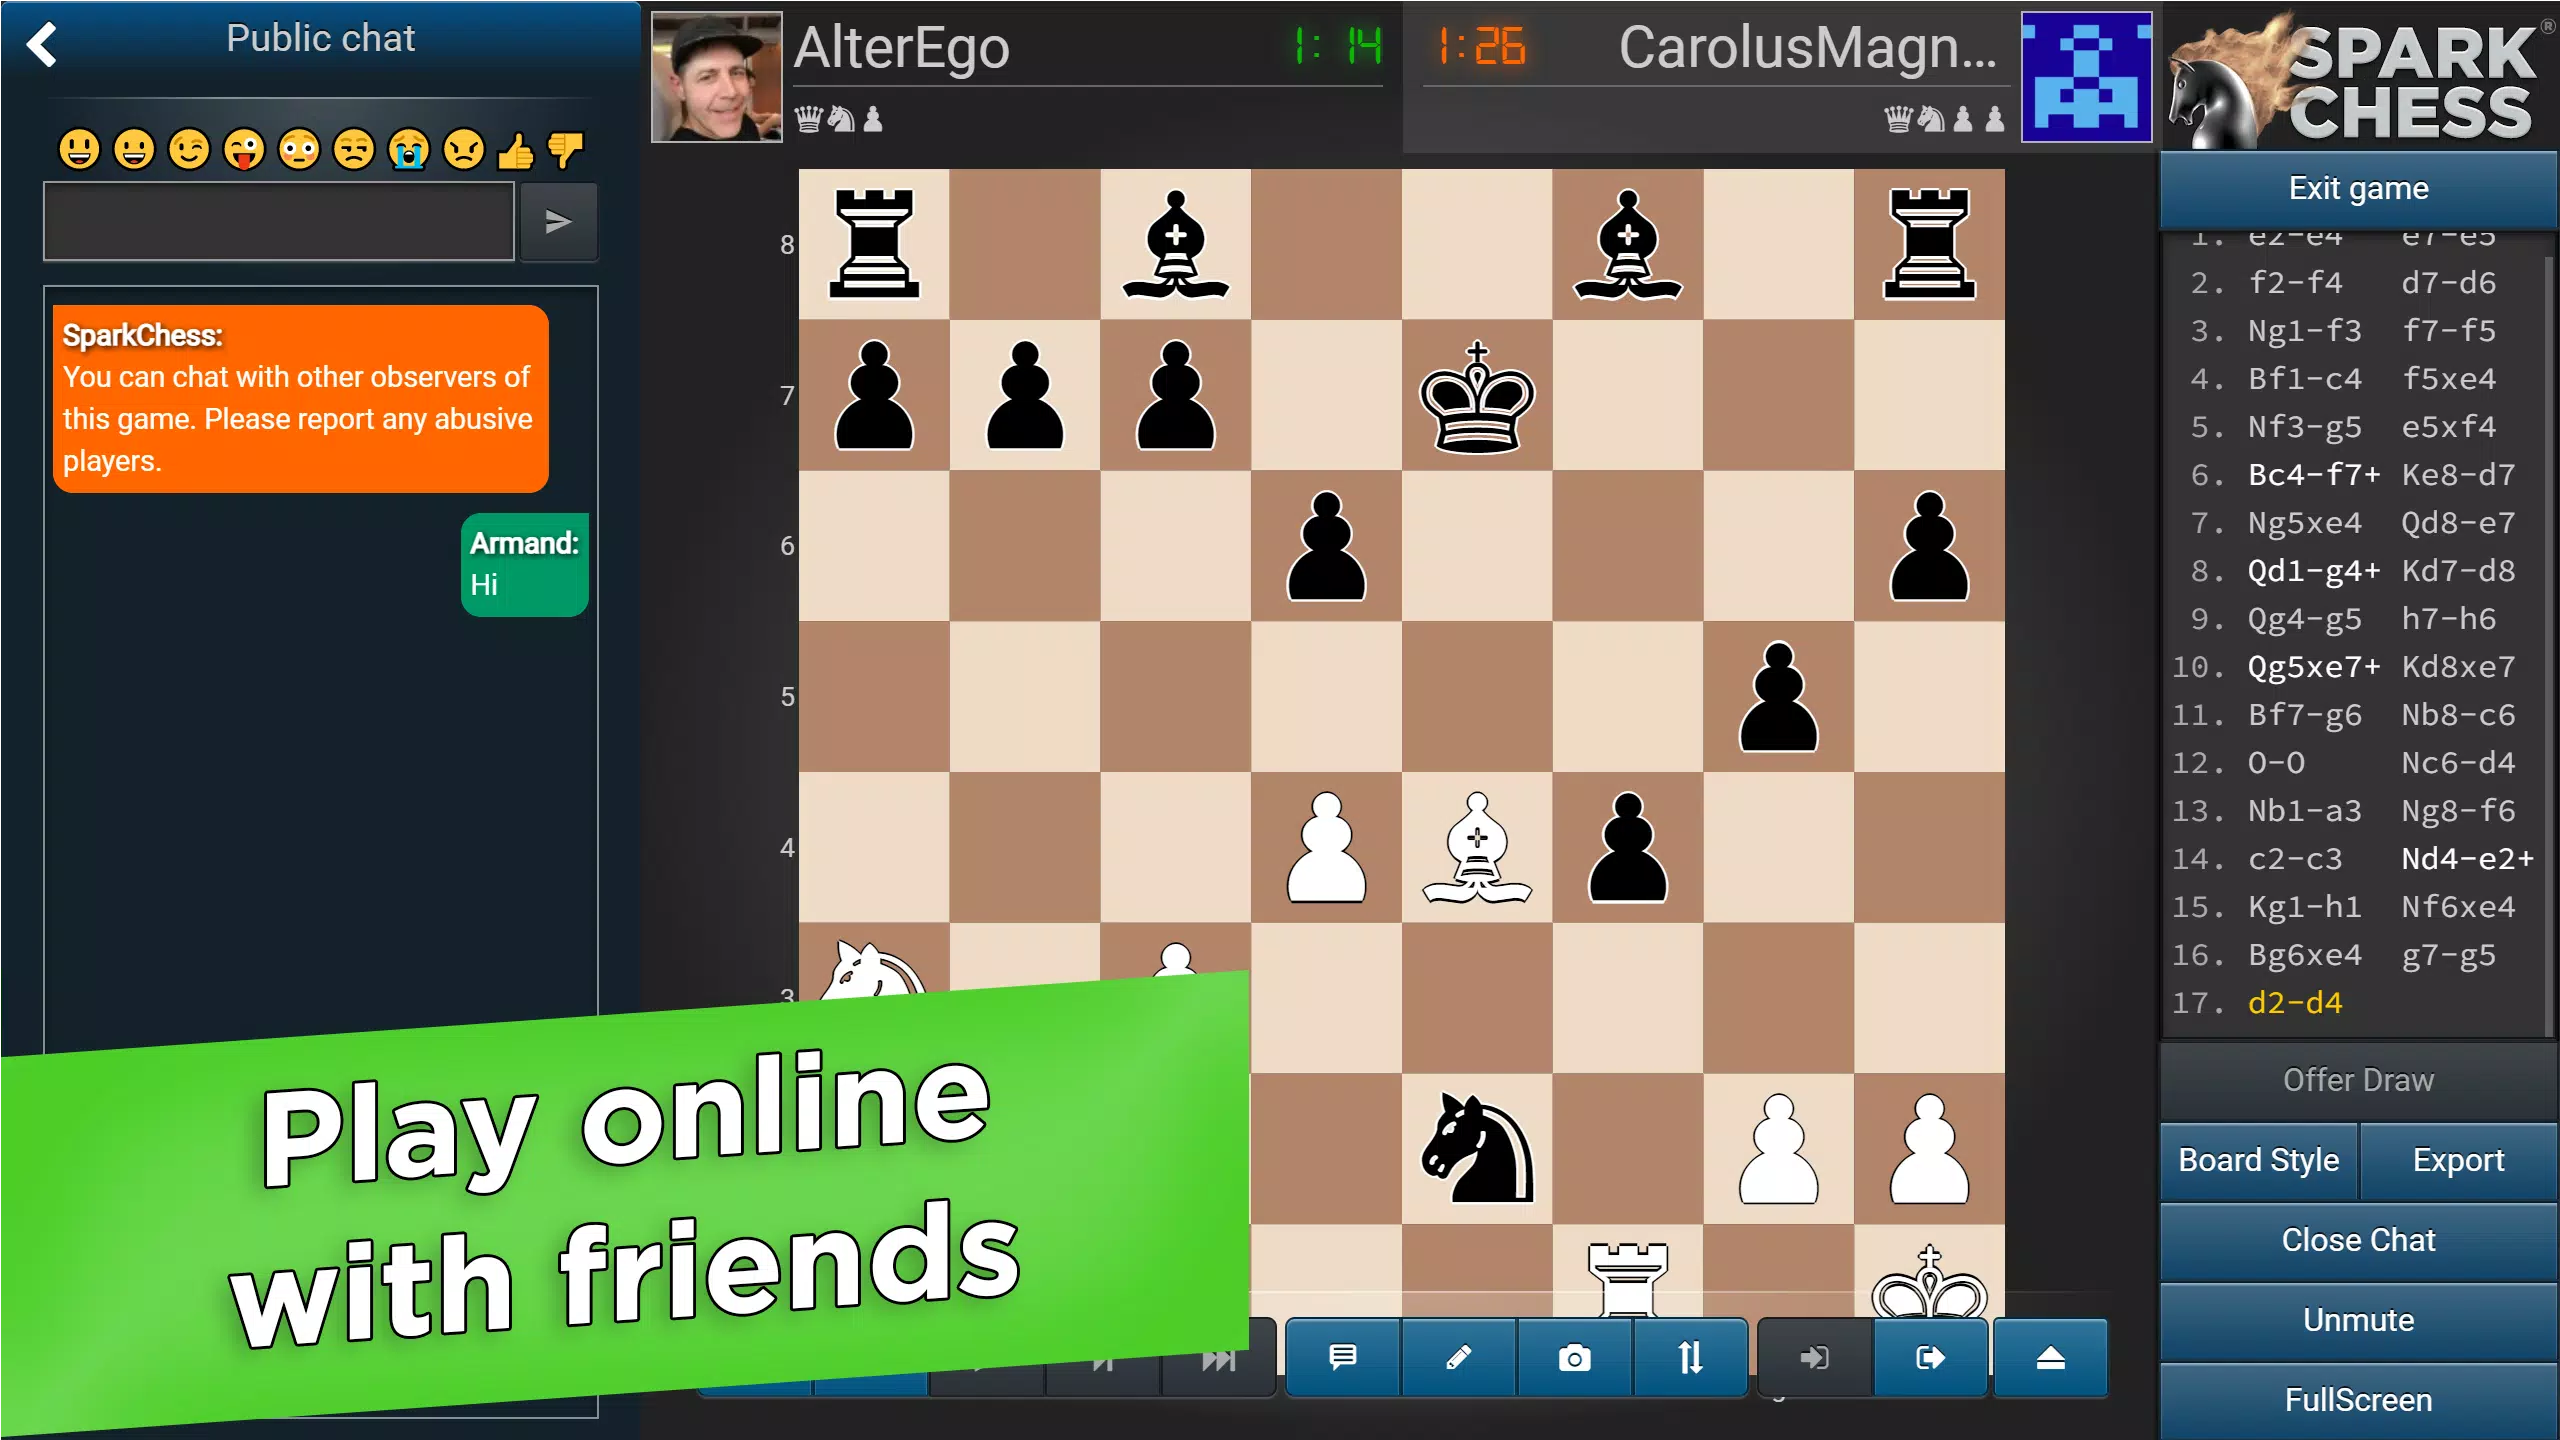 SparkChess Pro 14.0.0 (Full Version) Apk for Android